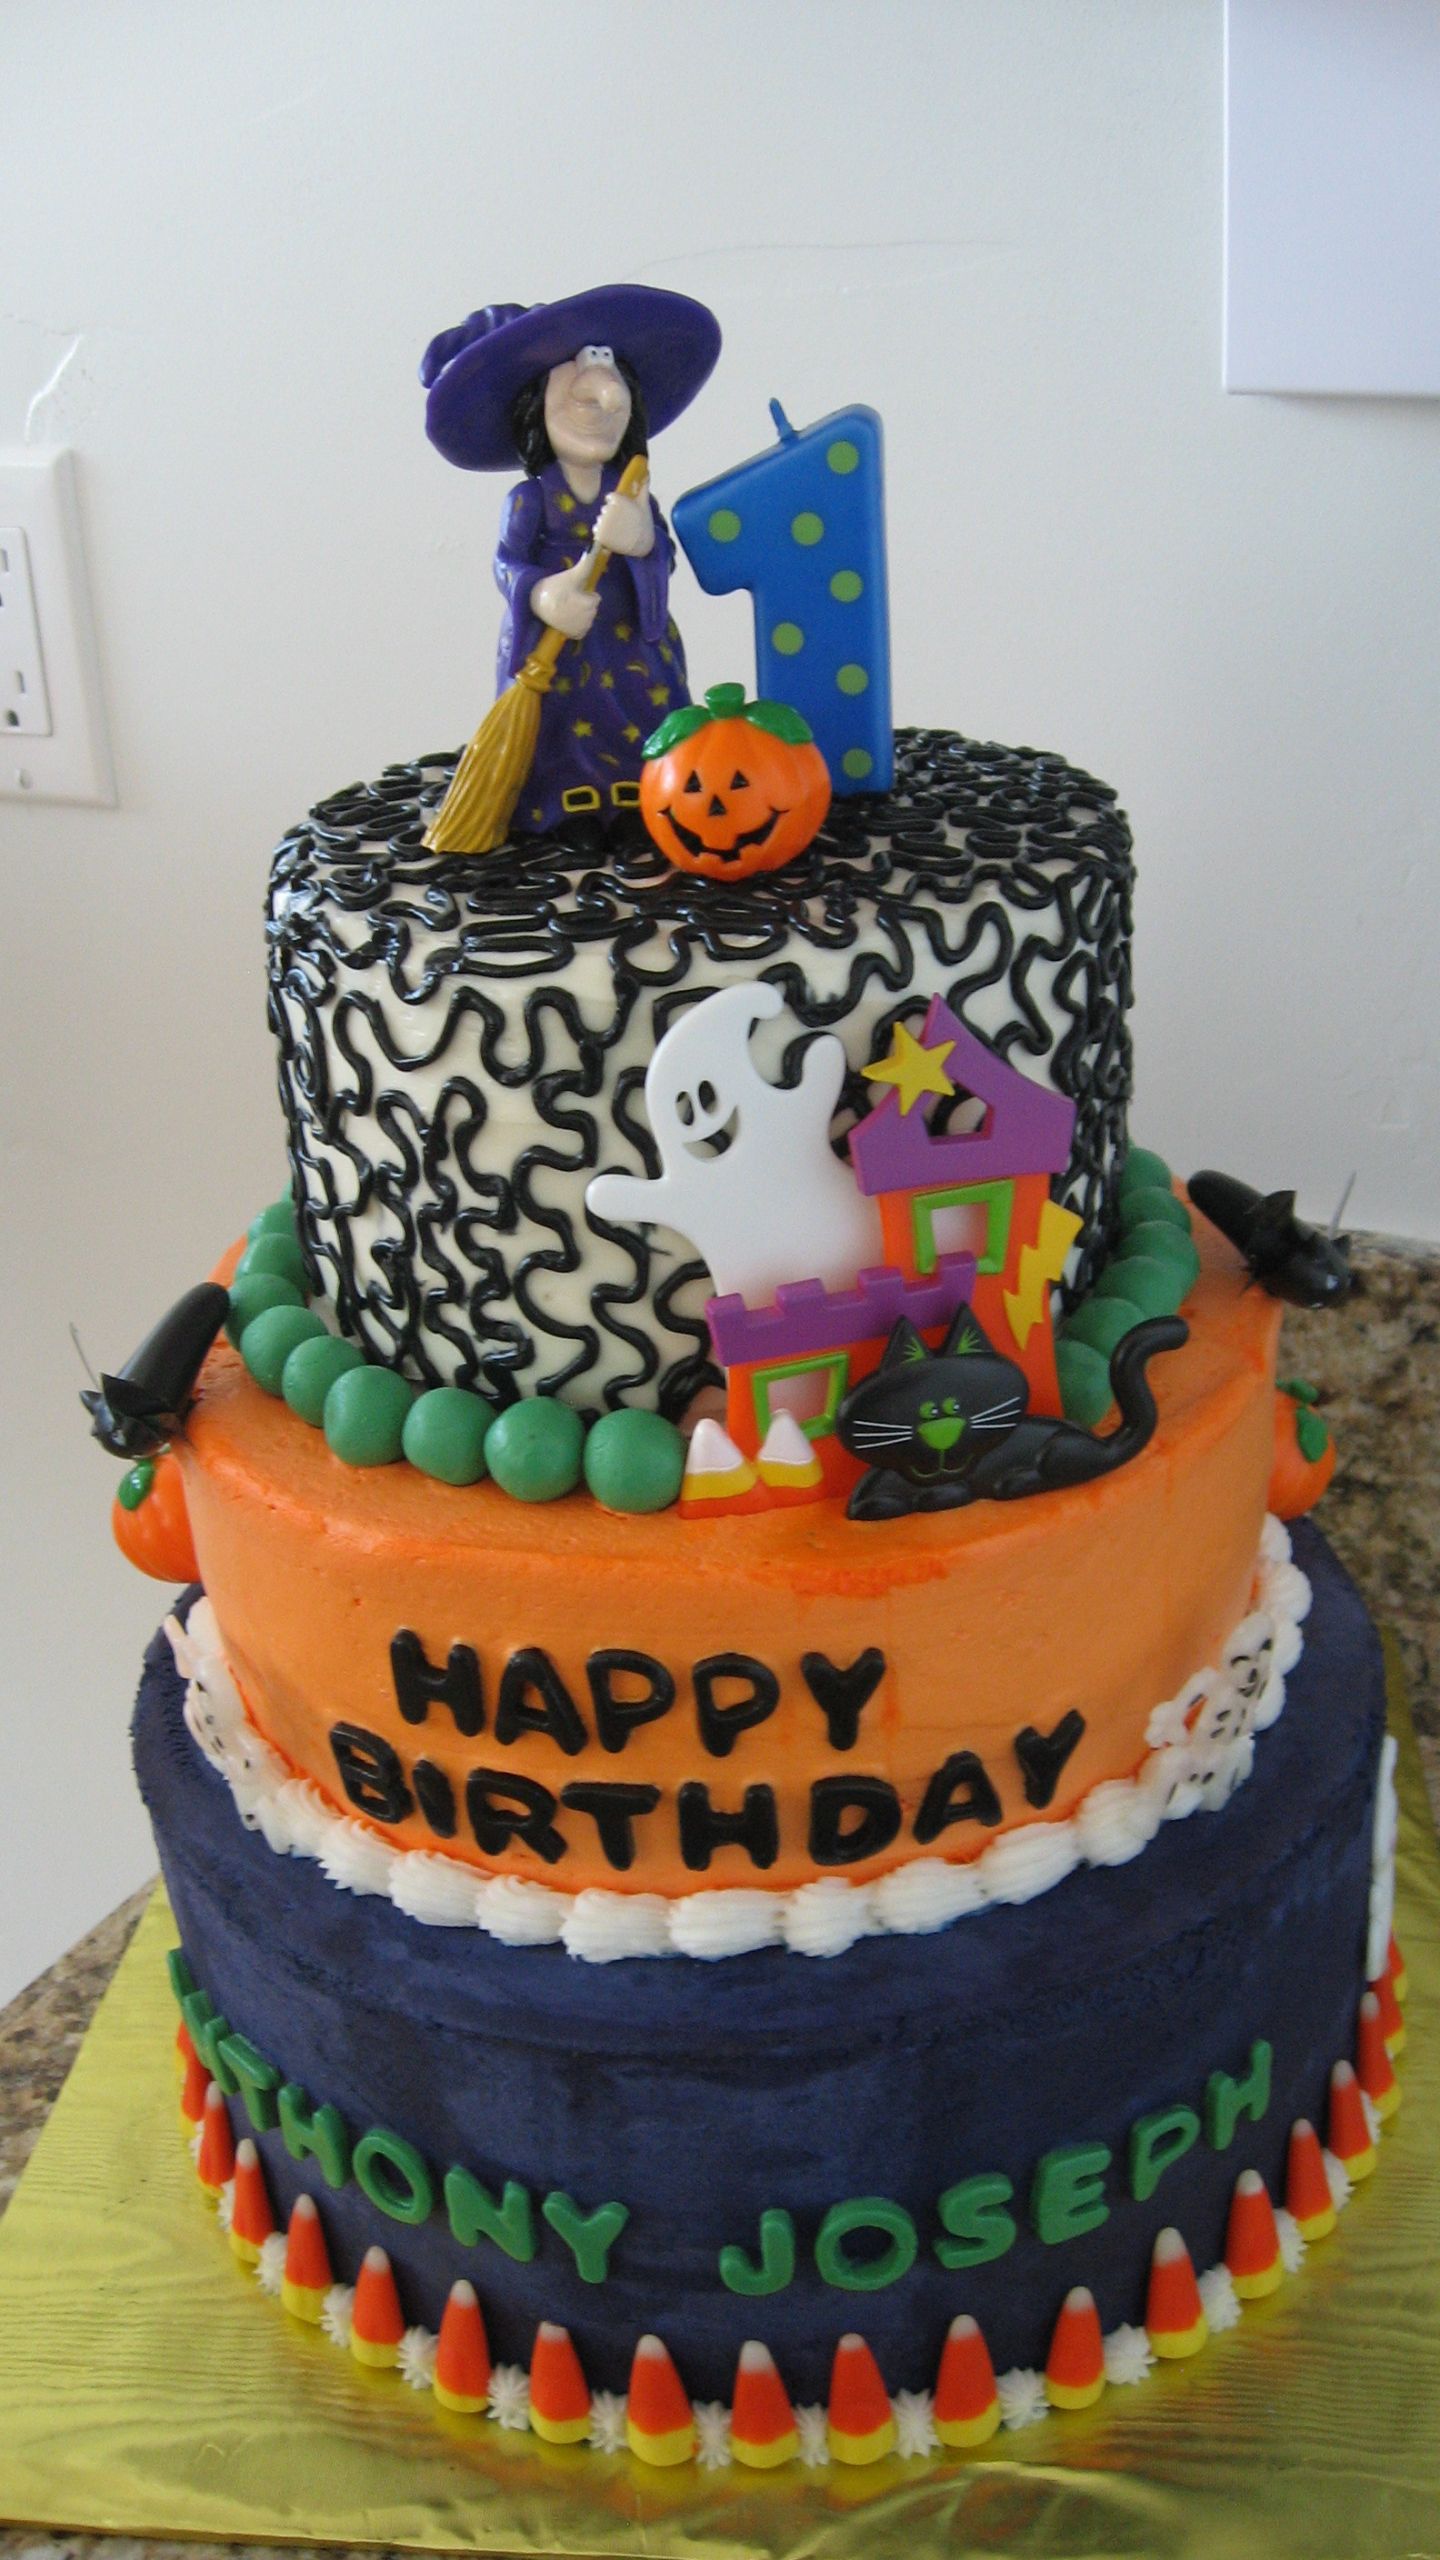 Cool Halloween Cakes
 20 Best Ever Halloween Cakes Page 5 of 30